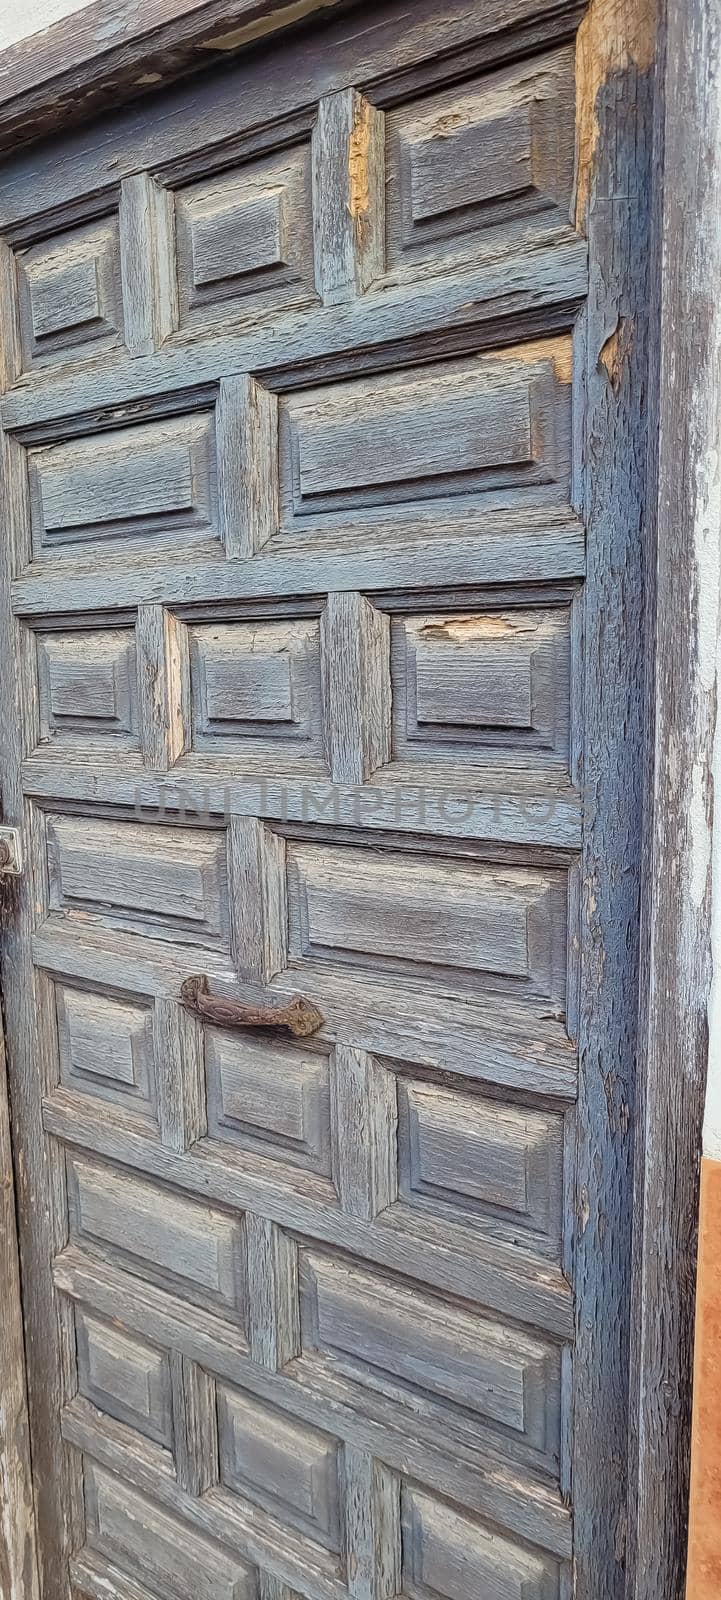 An old wooden door with traces of old paint and a rusty handle by Milanchikov